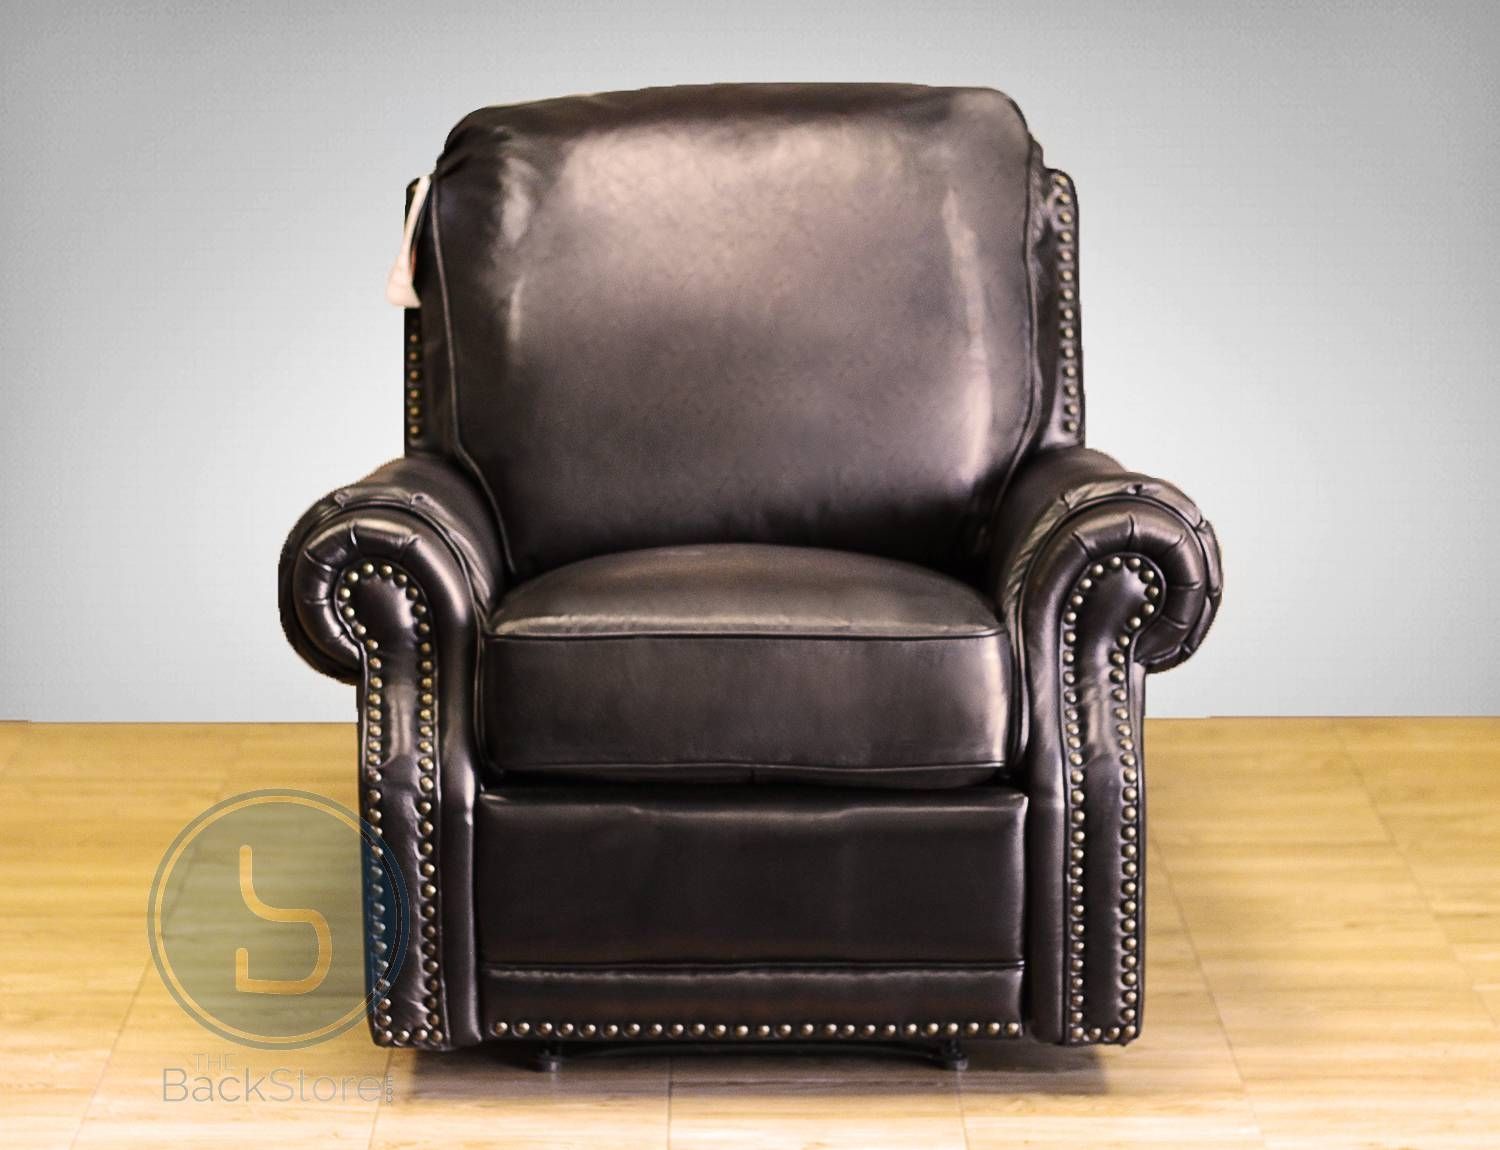 Barcalounger Premier Ii Leather Recliner Chair – Leather Recliner With Regard To Barcalounger Sofas (View 15 of 15)